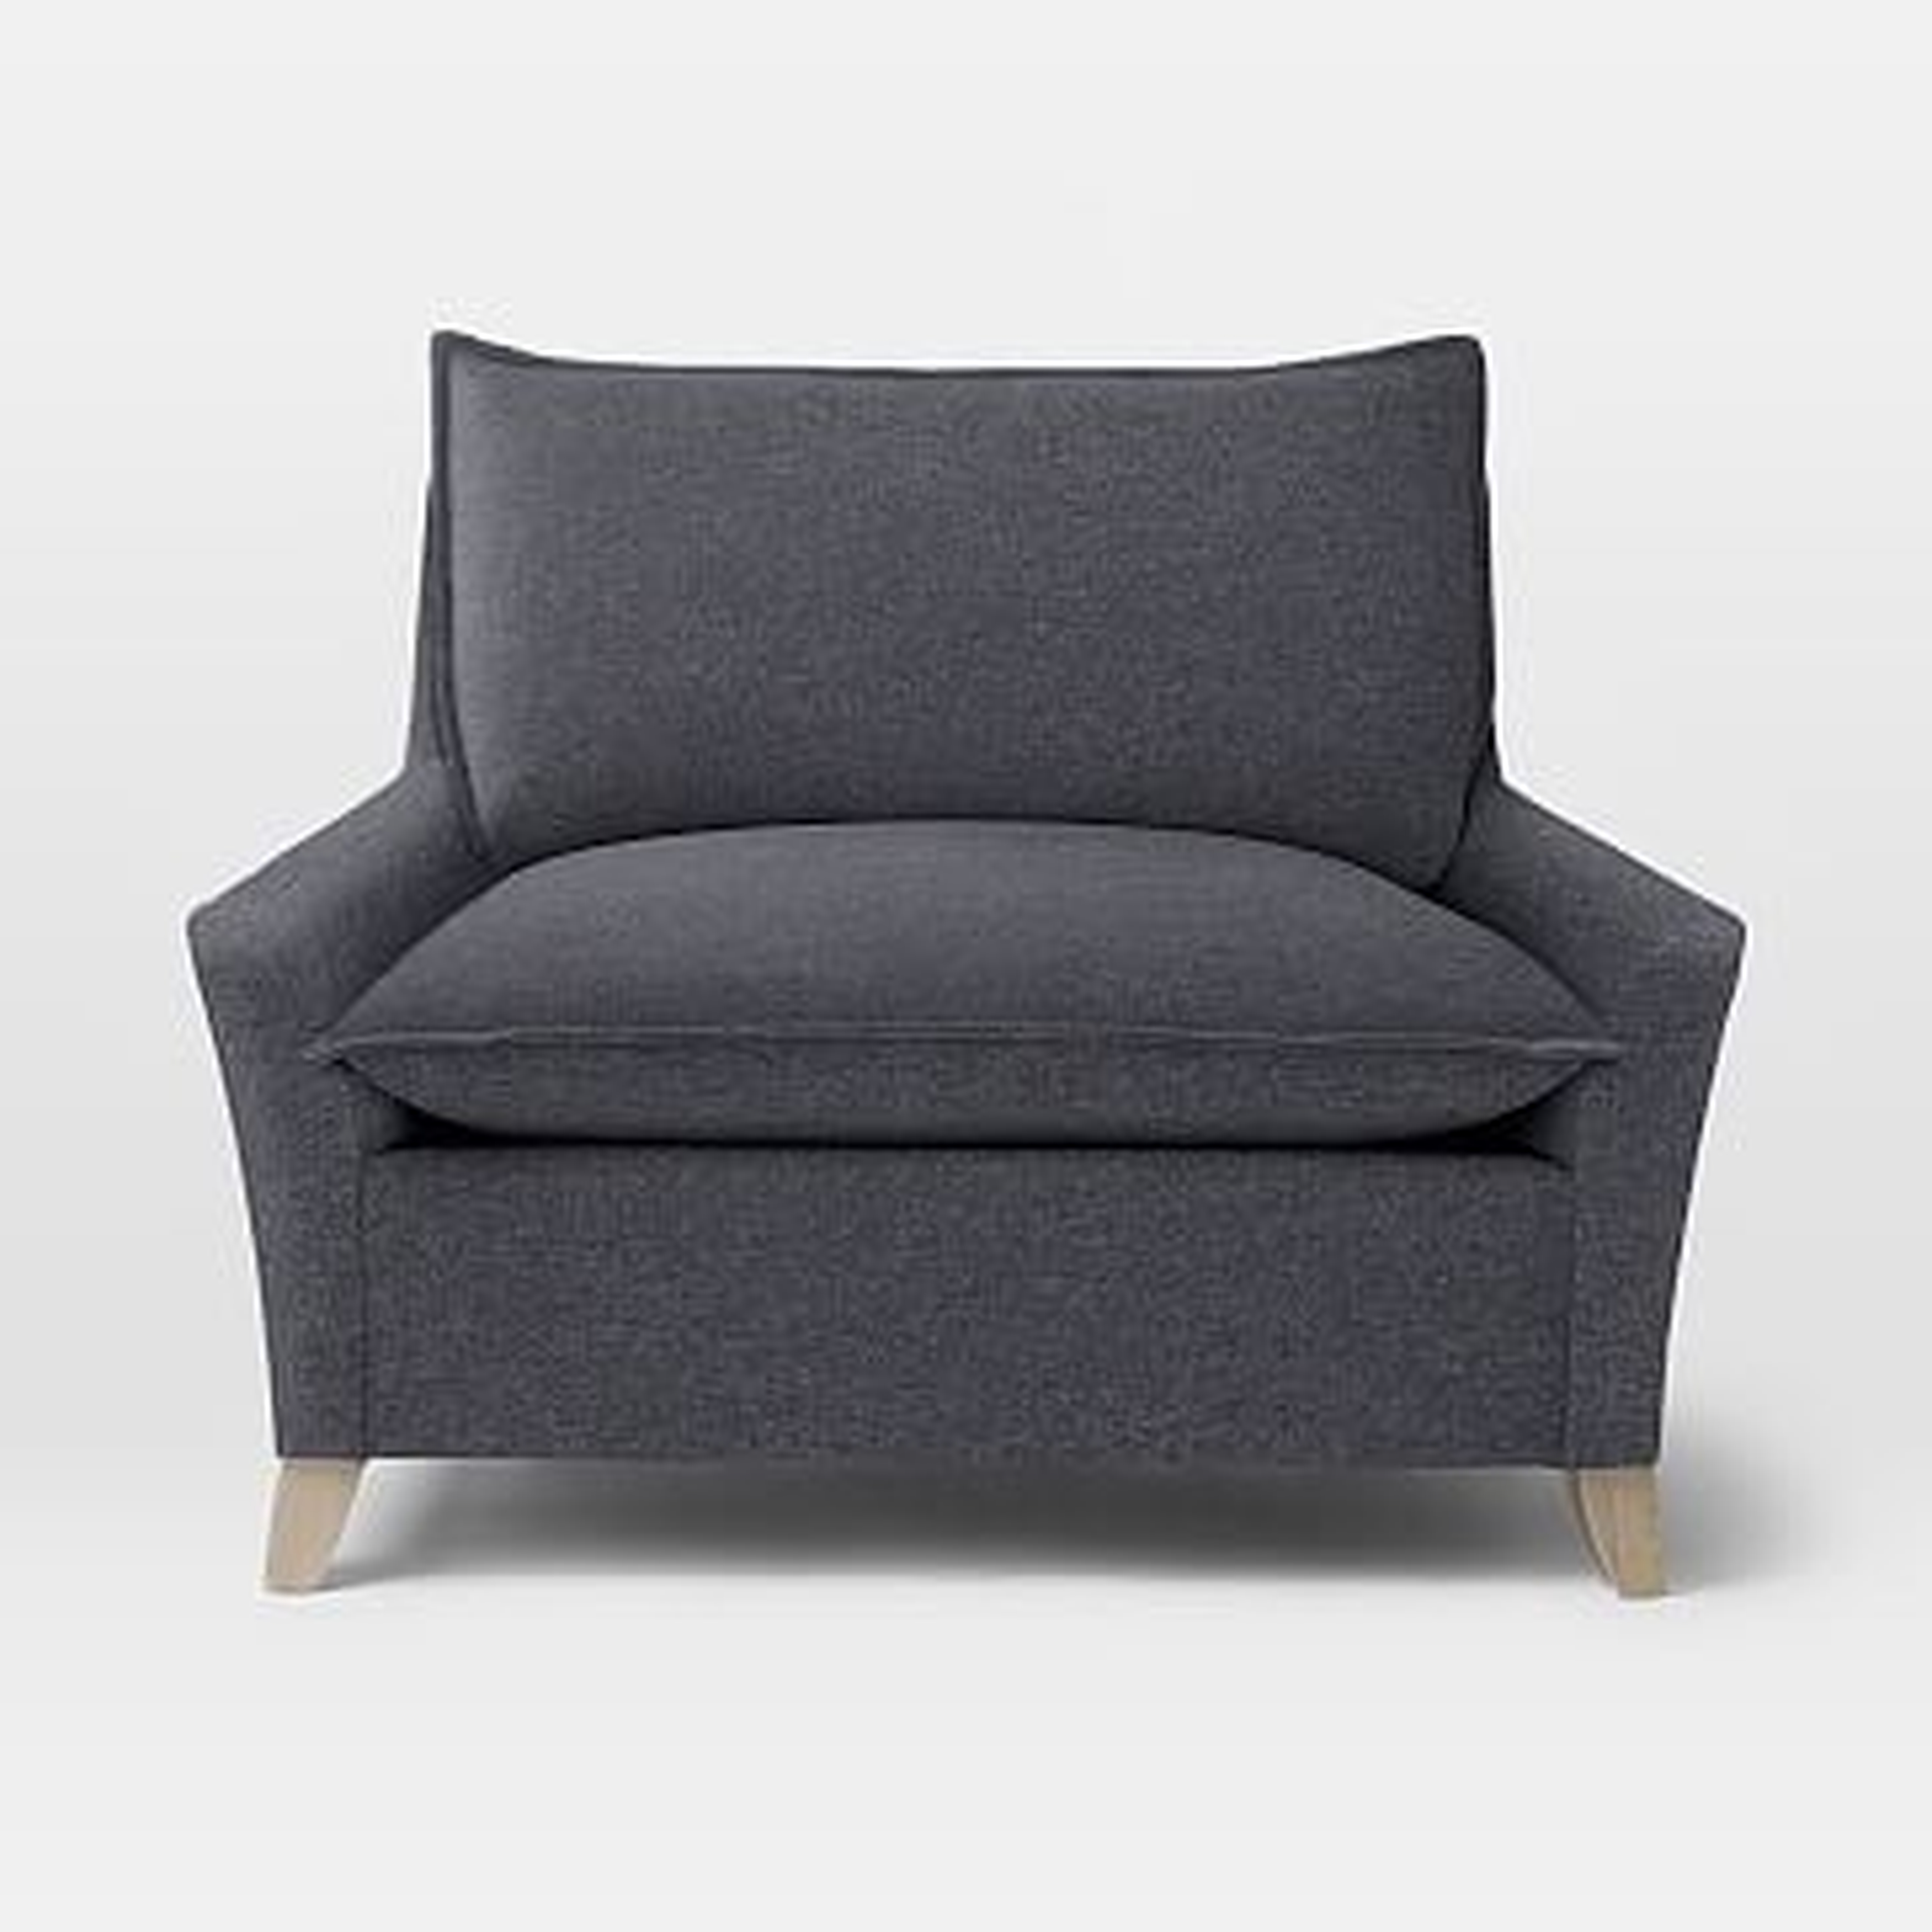 Bliss Down-Filled Chair-and-a-Half, Marled Microfiber, Granite - West Elm